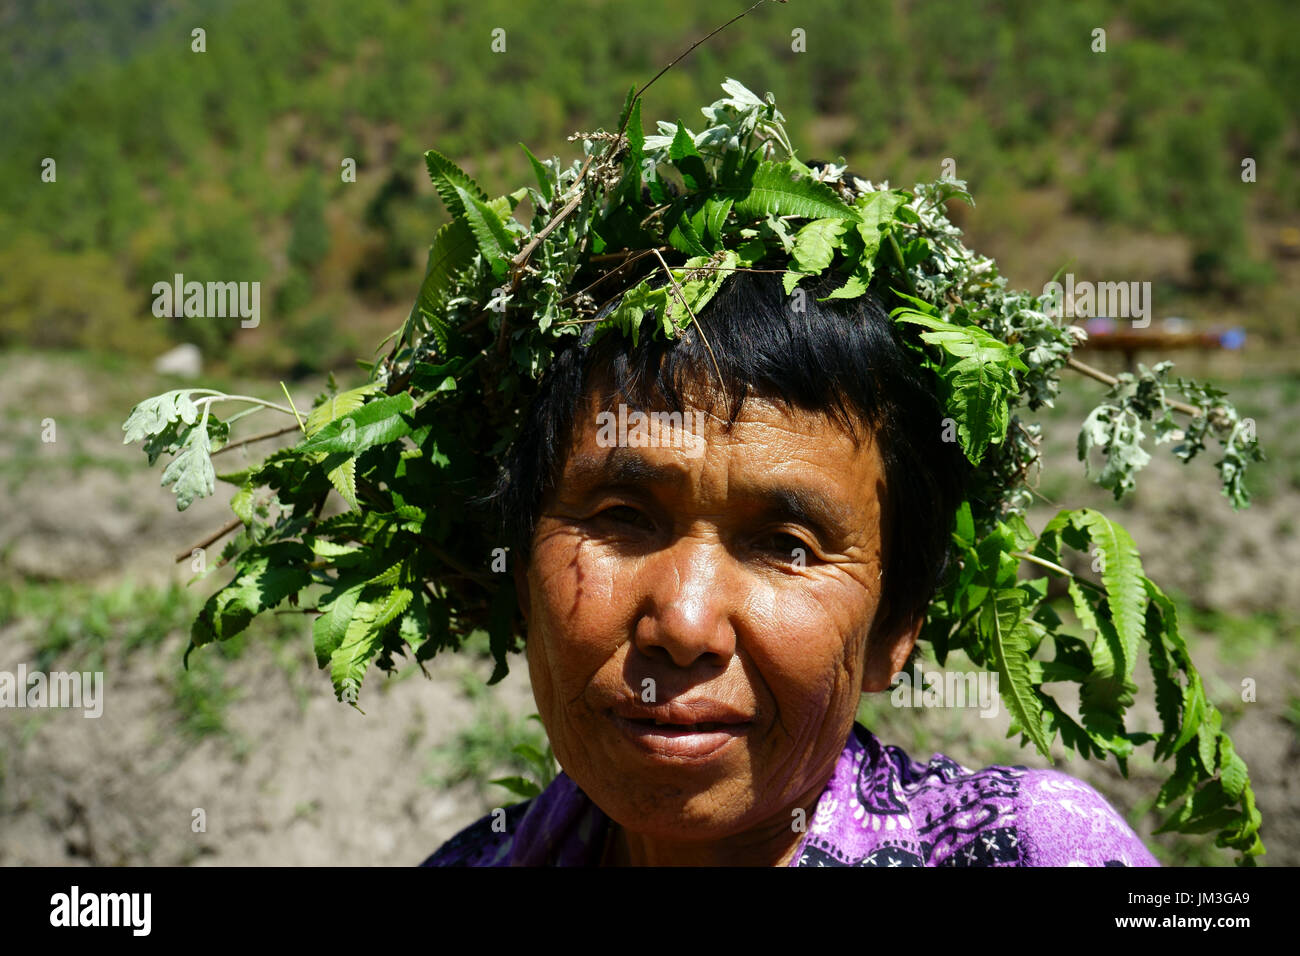 Plants and leaves protect woman's head from sun while weeding beanfield, Punakha valley, Bhutan Stock Photo